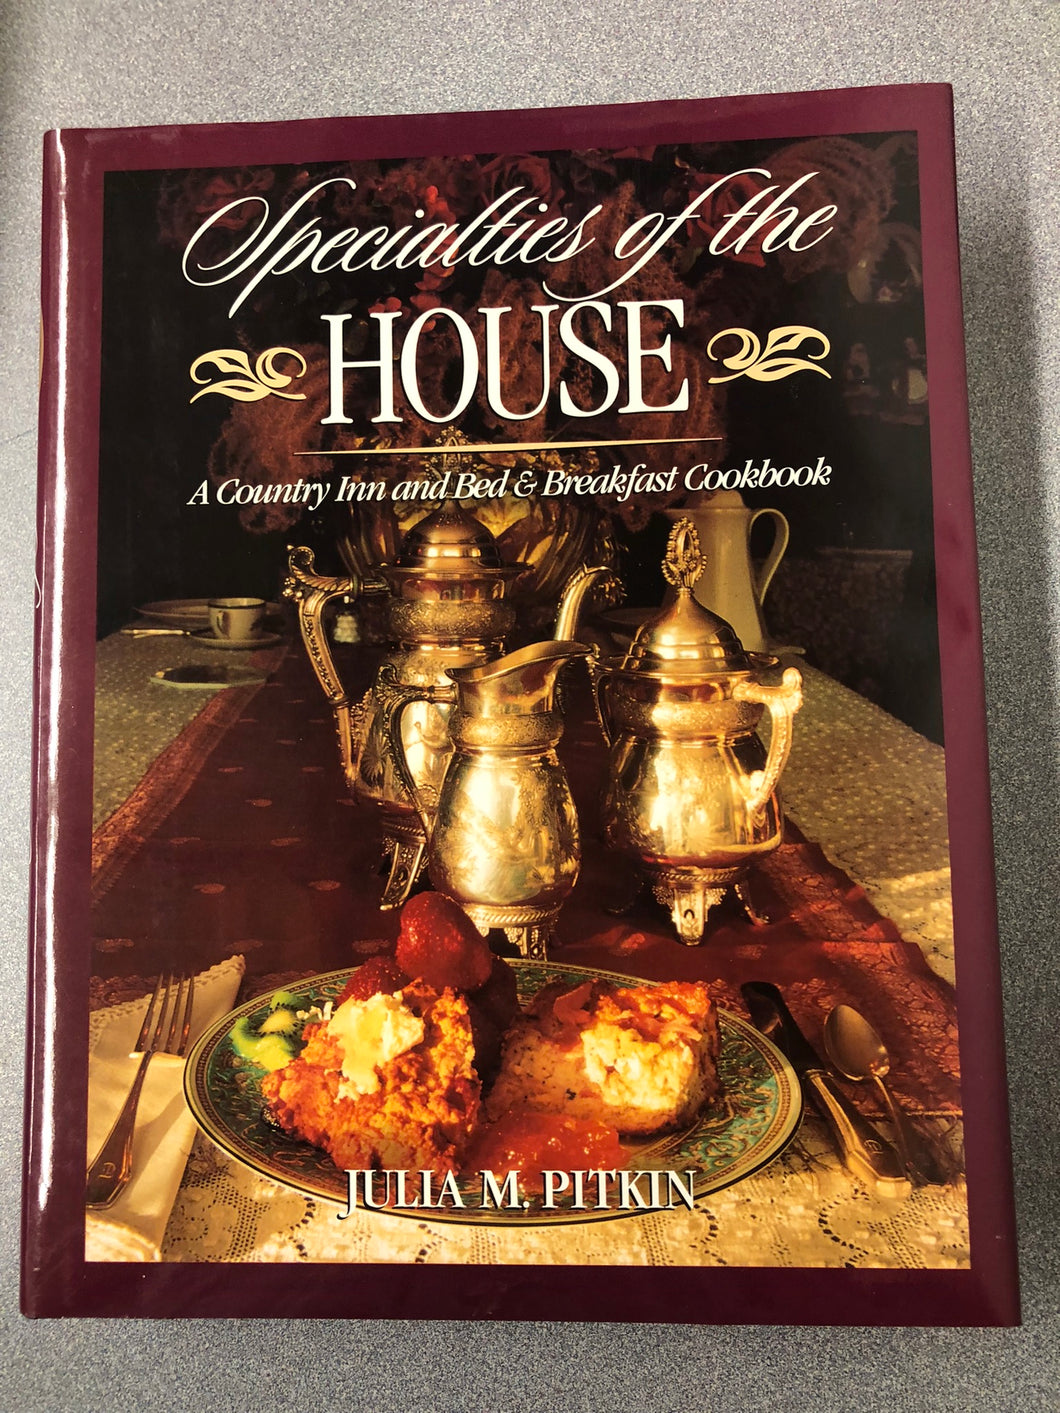 Specialties of the House: A Country Inn and Bed and Breakfast Cookbook, Pitkin, Julia M. [1996] CO 7/22